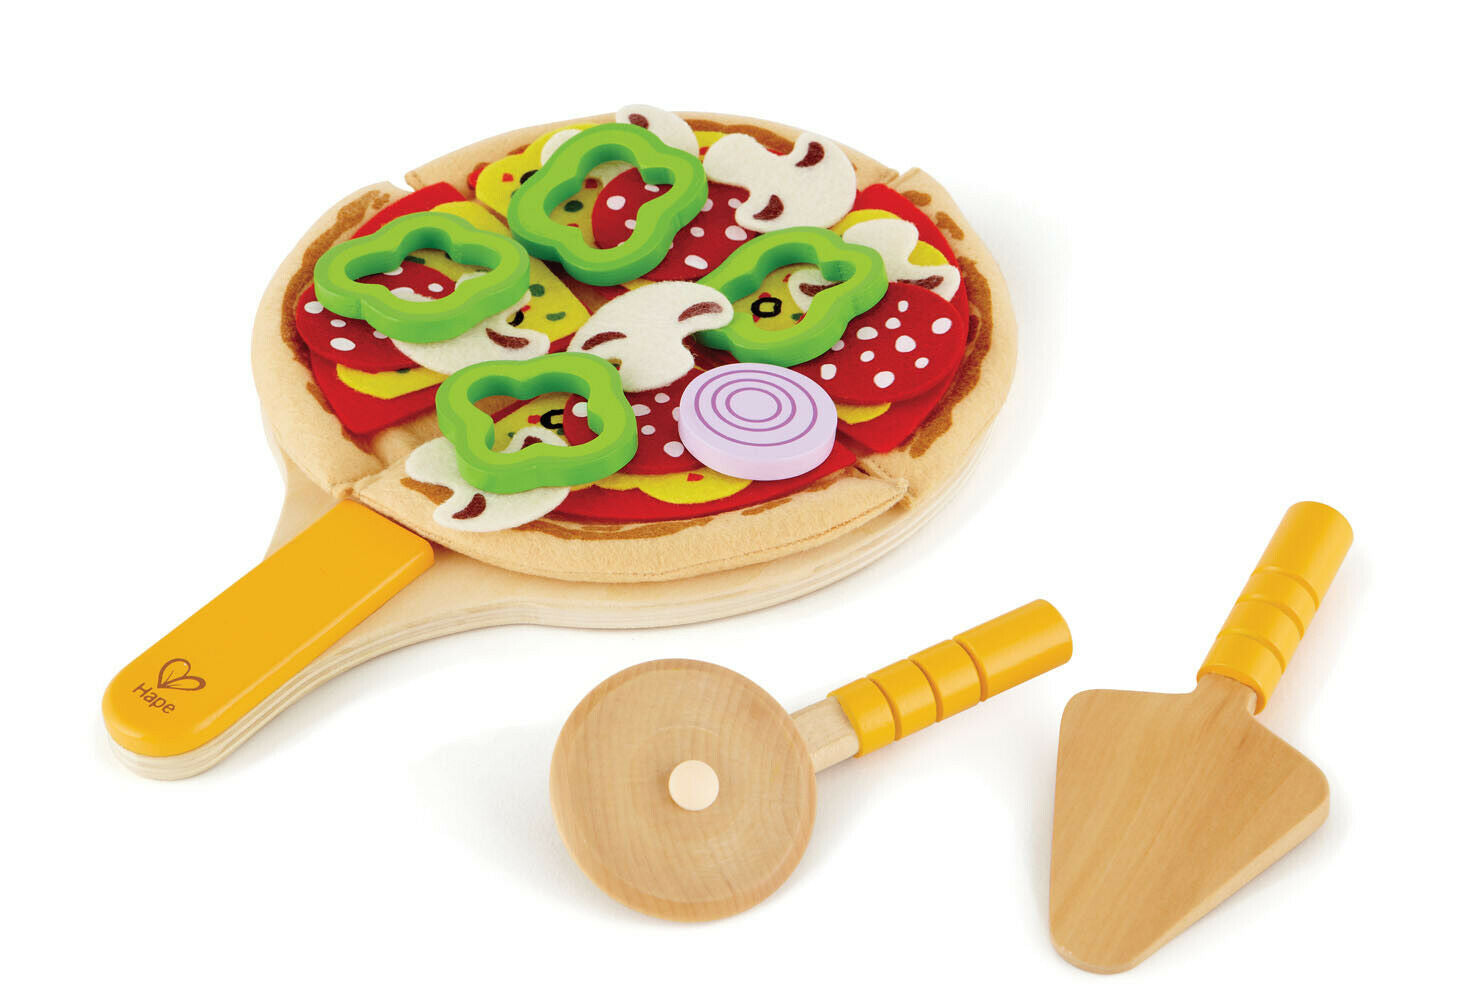 E3129 HAPE Homemade Pizza Wood Set [Playfully Delicious] Children Age 3yrs+ 31pc